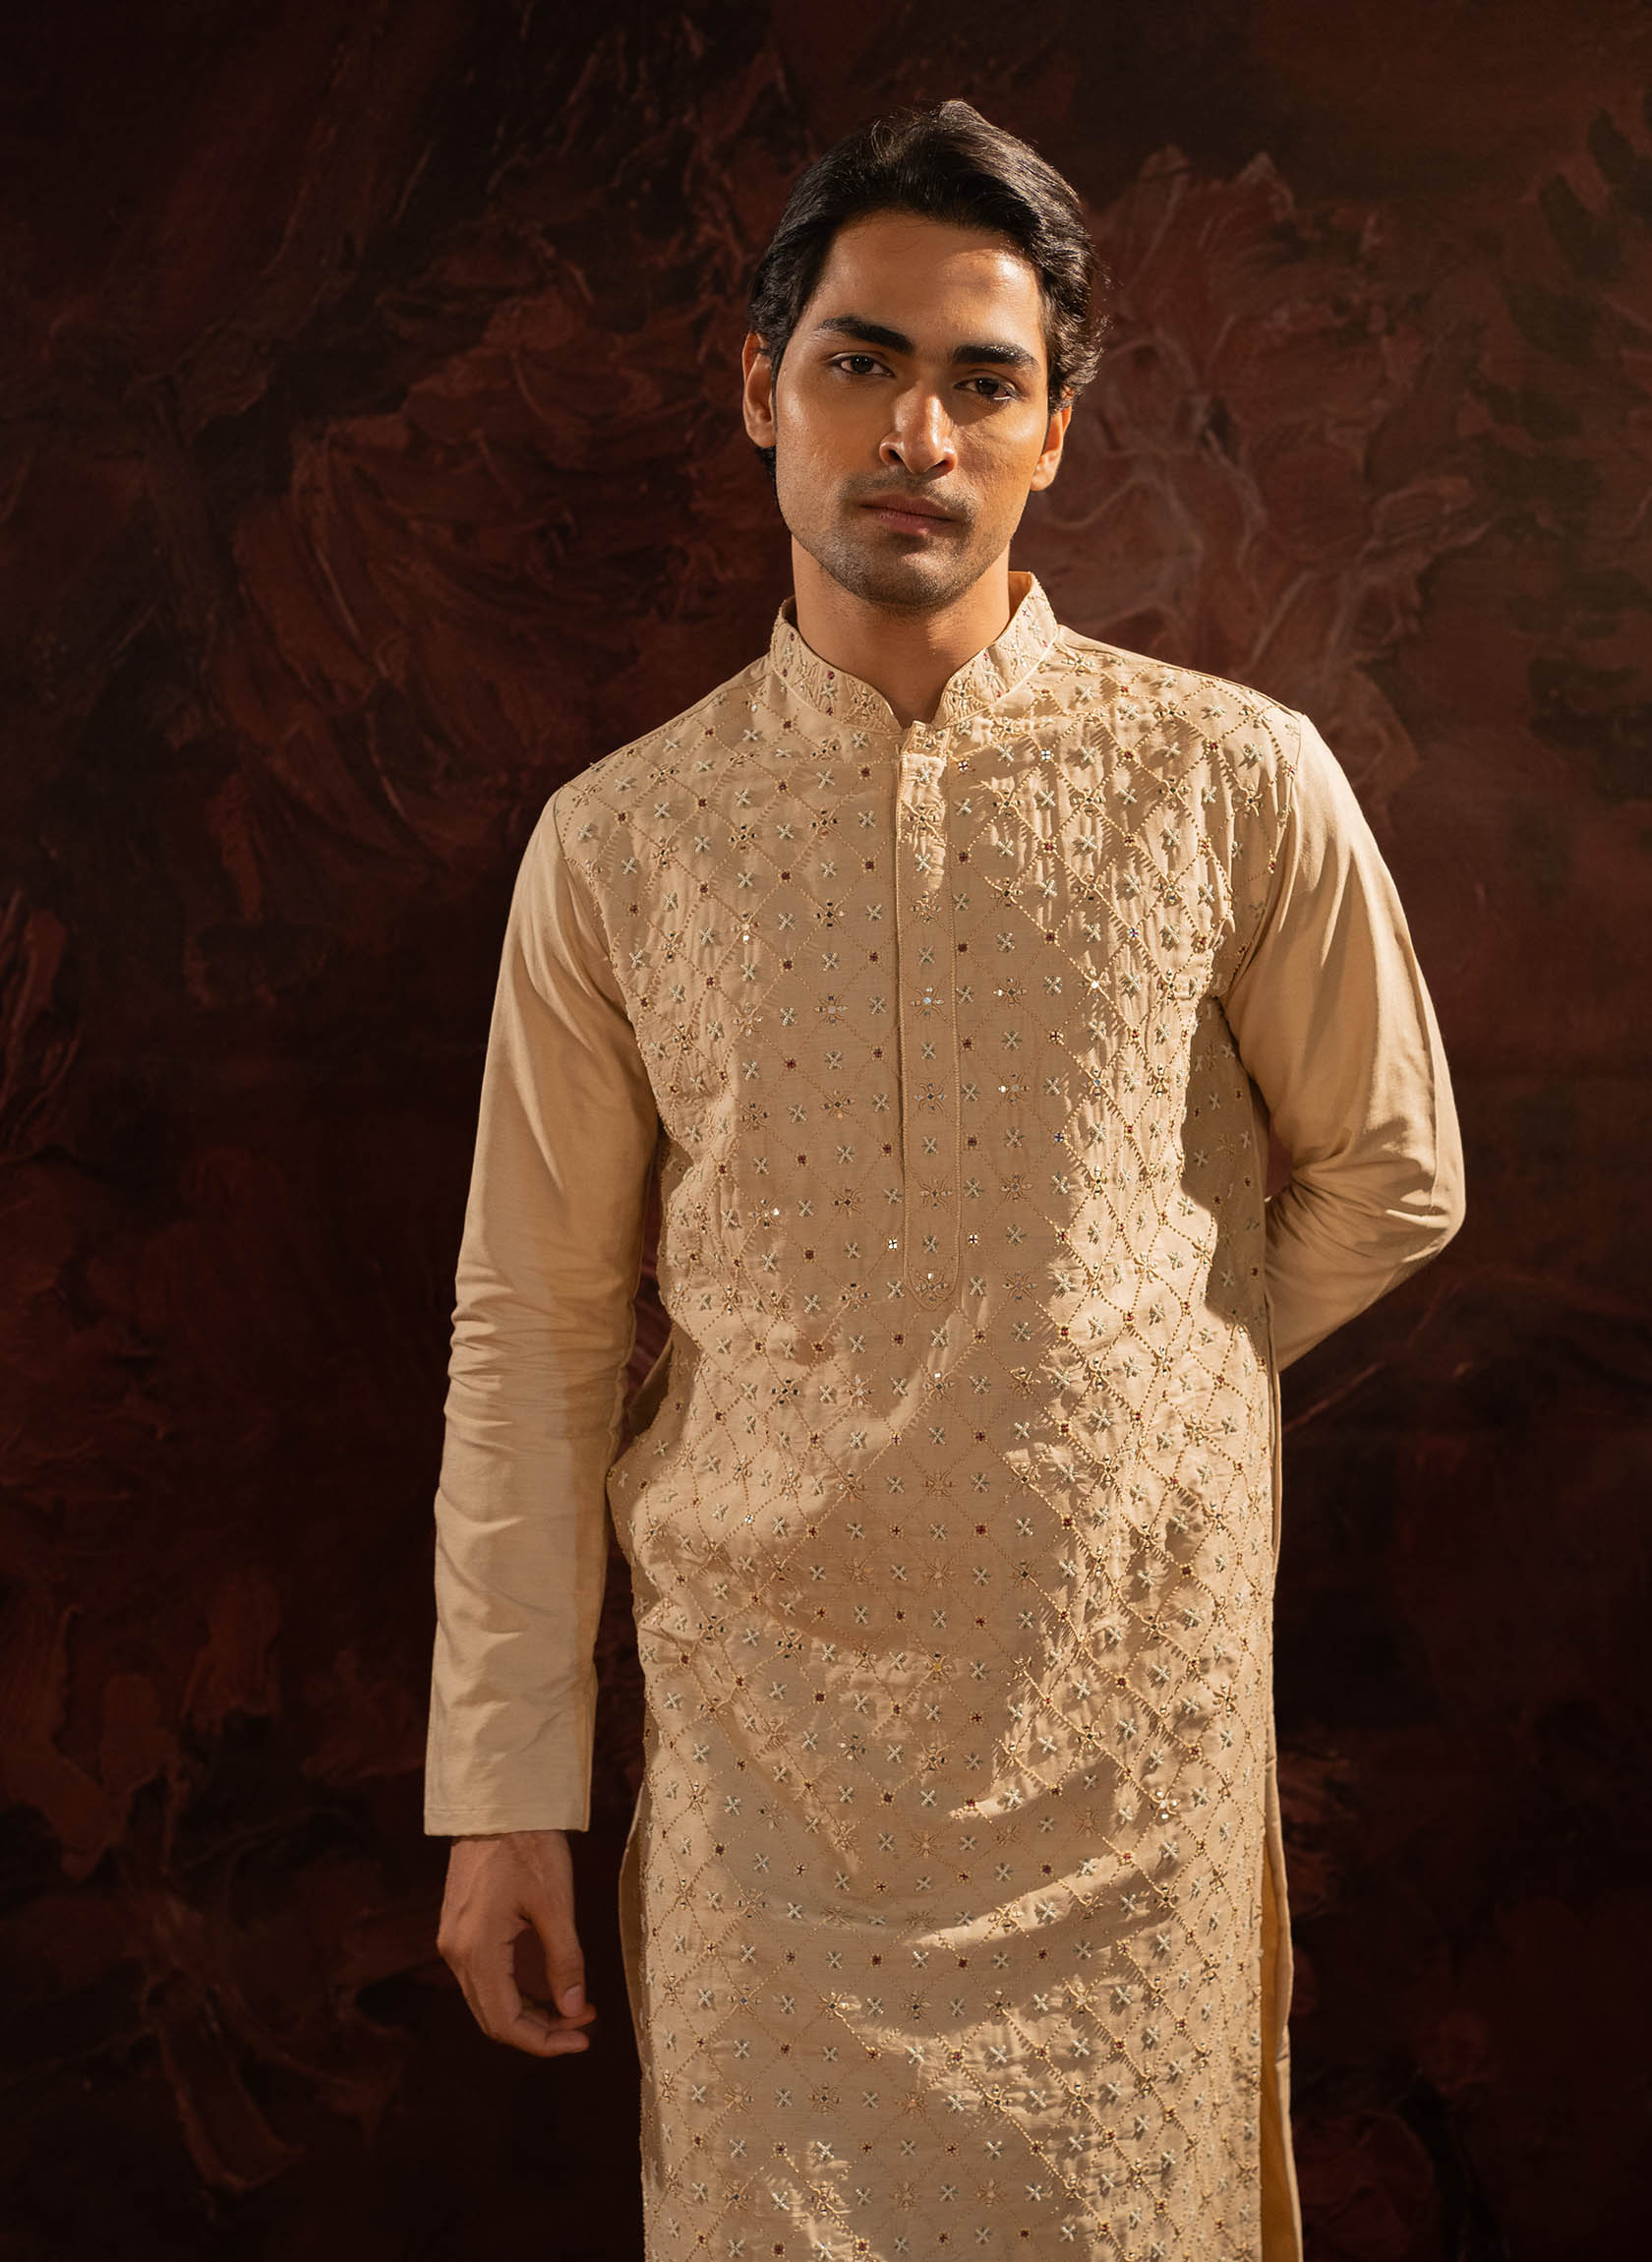 Beige Silk Kurta with hand done french knot embroidery and pearl highlights. Comes with Churidar.